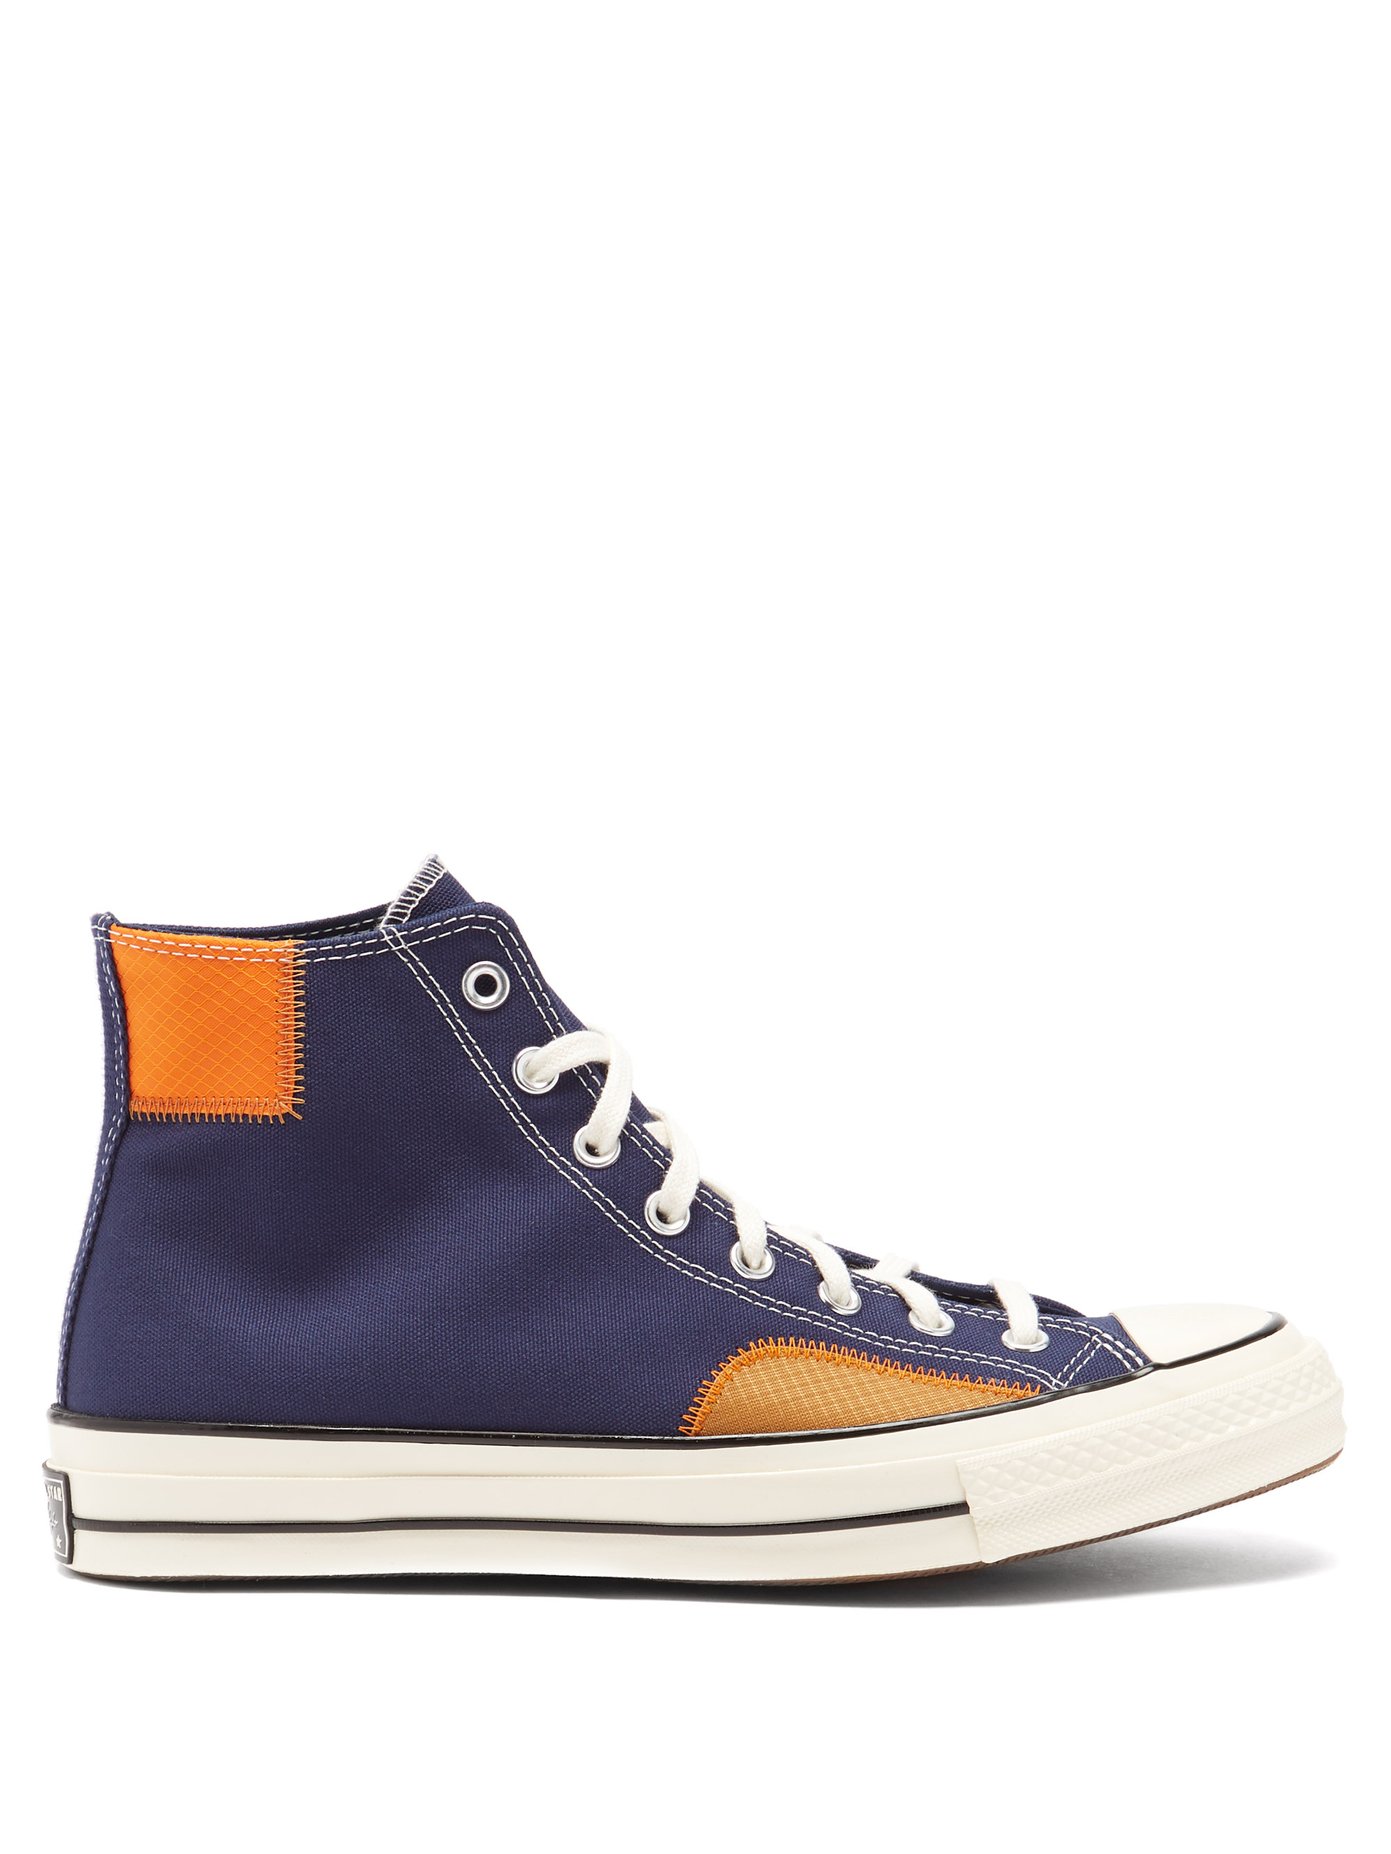 converse chuck trainers